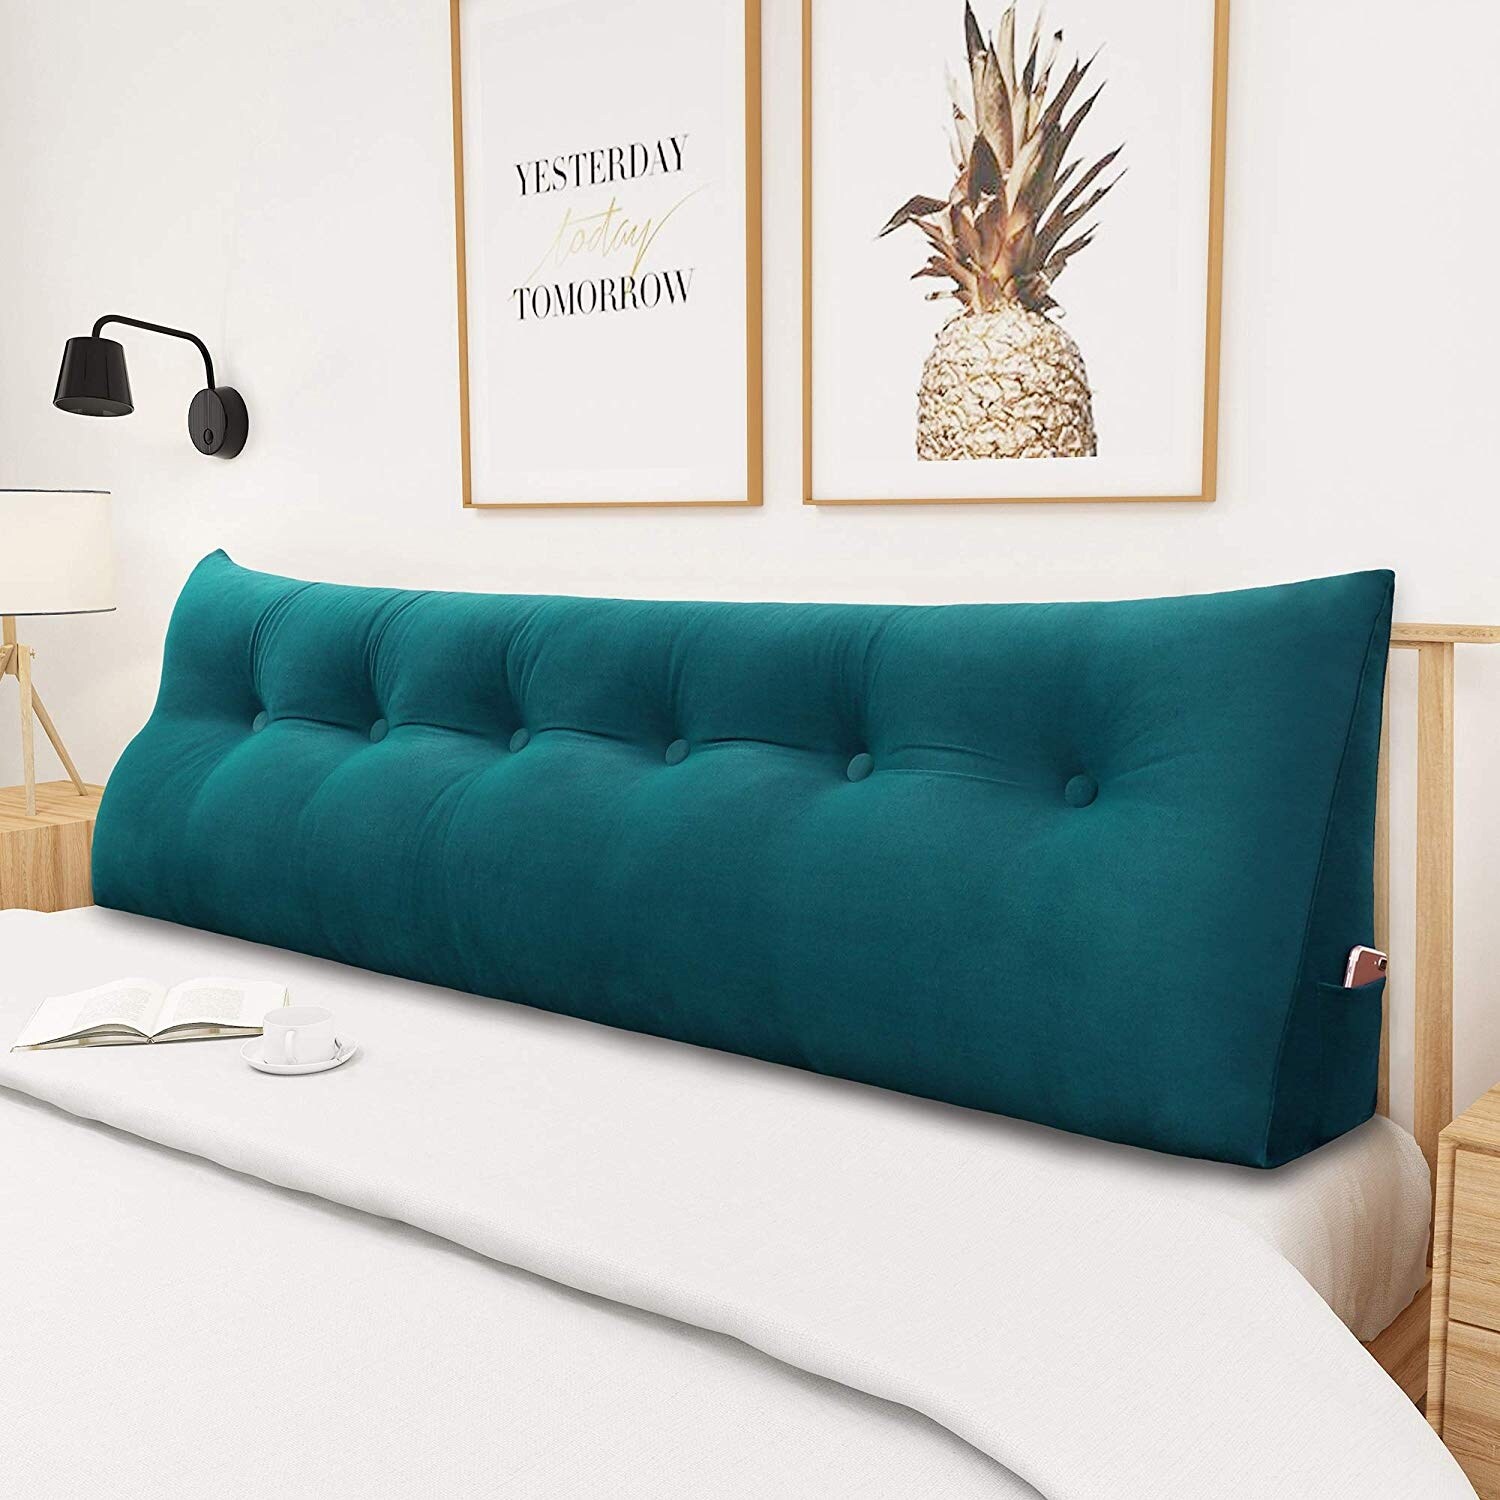 https://ak1.ostkcdn.com/images/products/is/images/direct/cb6373aea442f2c2c061cb7e13c4f270badafc82/WOWMAX-Bed-Rest-Wedge-Reading-Pillow-Gray-Velvet-Bolster-Back-Support.jpg